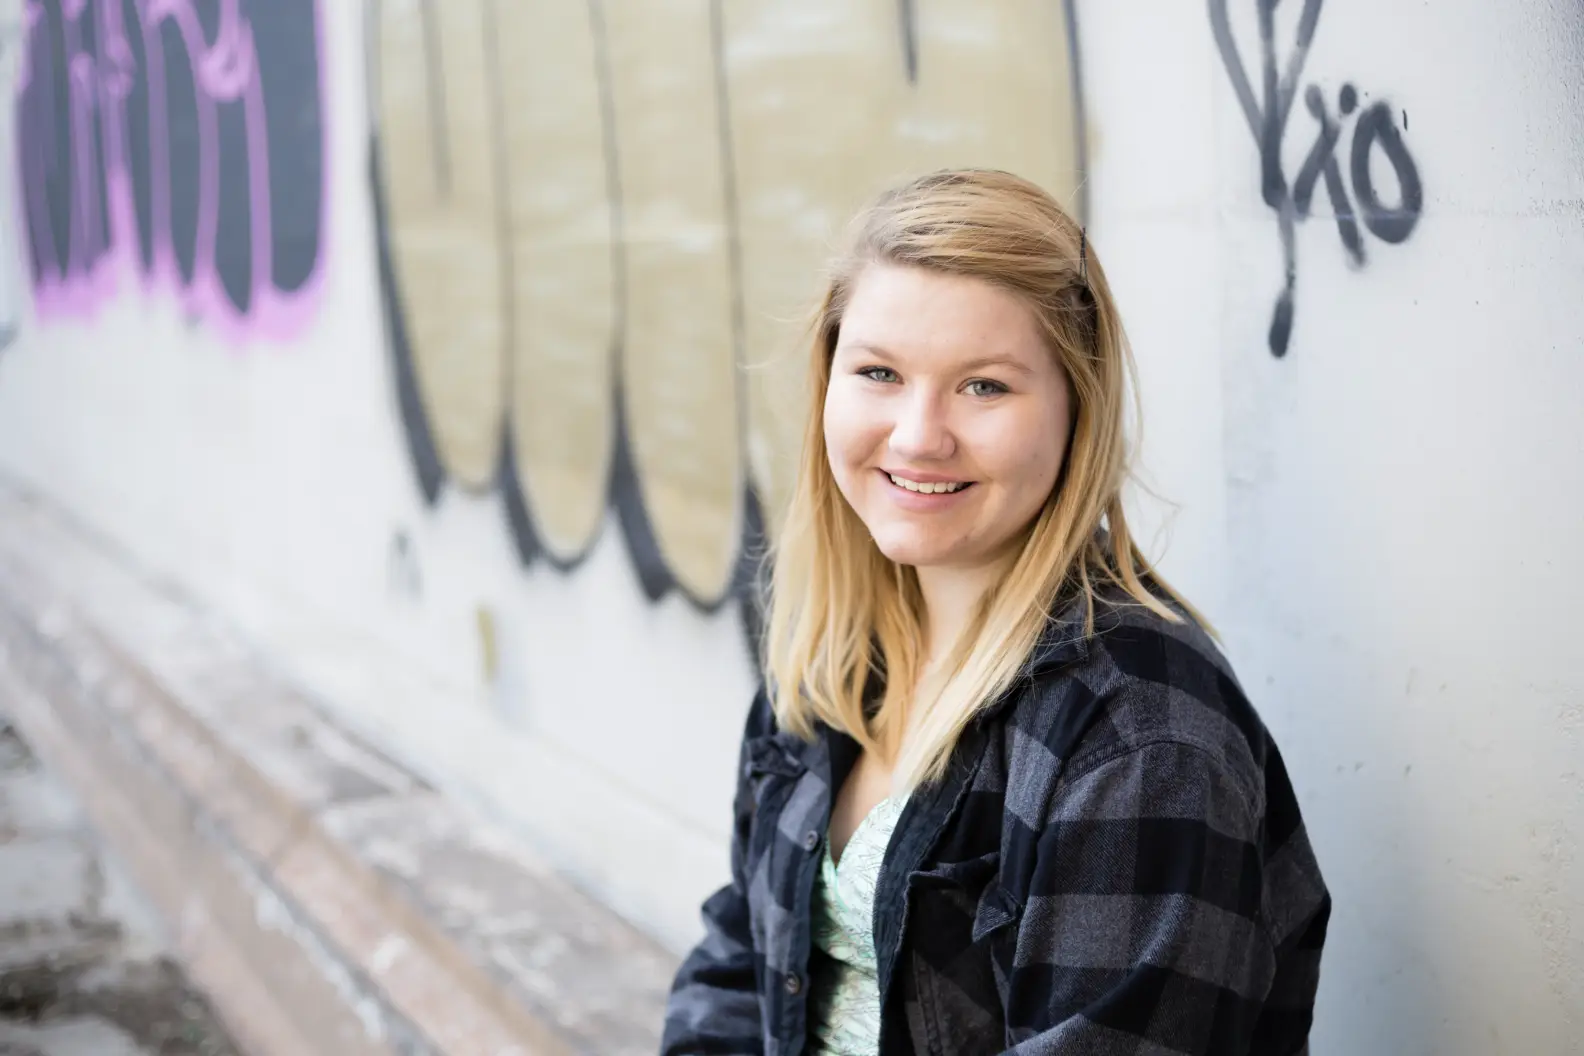 Young woman with long blonde hair sitting in front of wall with graffiti and smiling at camera